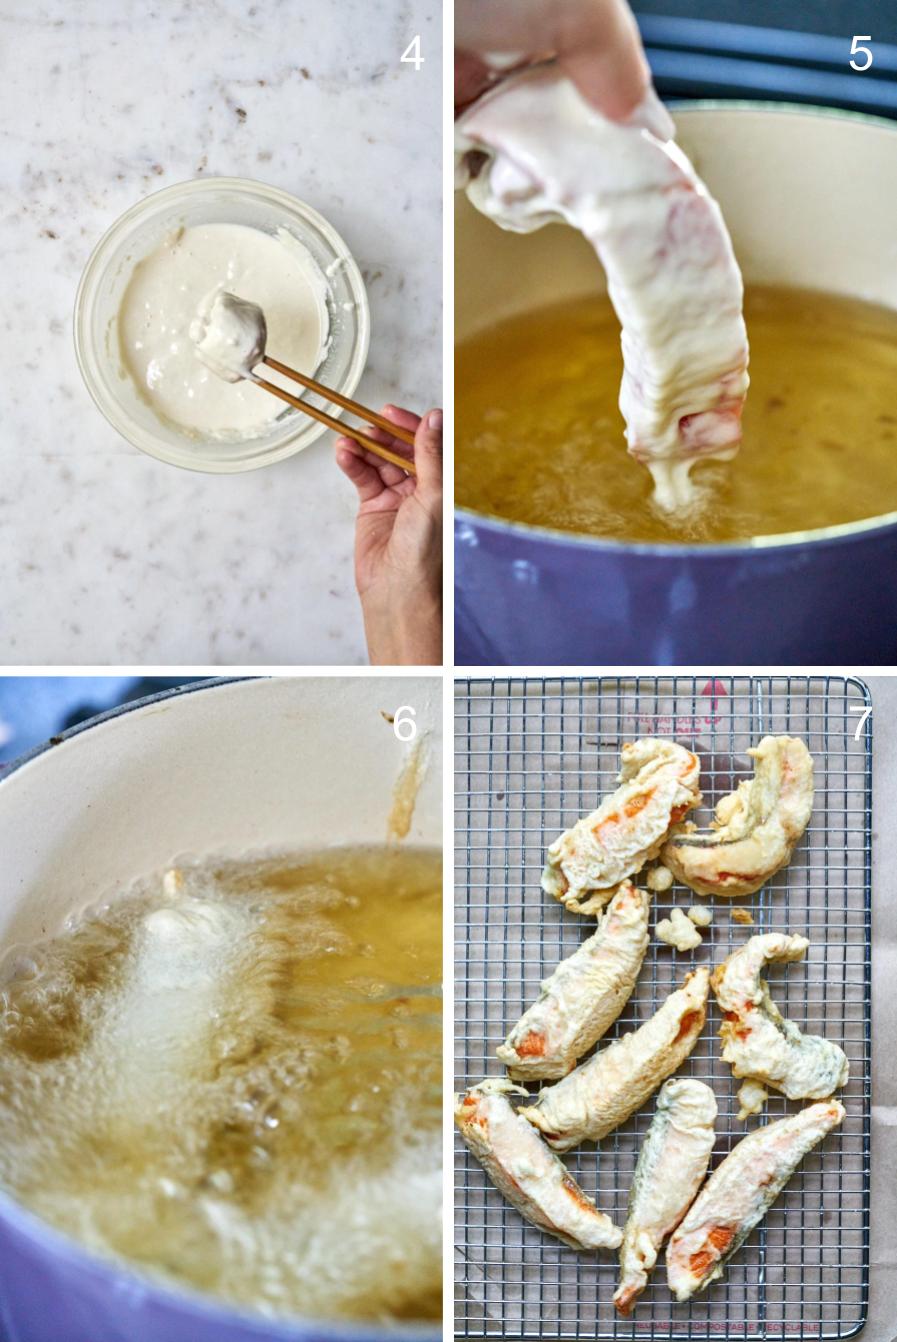 Steps to fry fish tempura from dipping into the batter to removing excess oil on a wire rack.